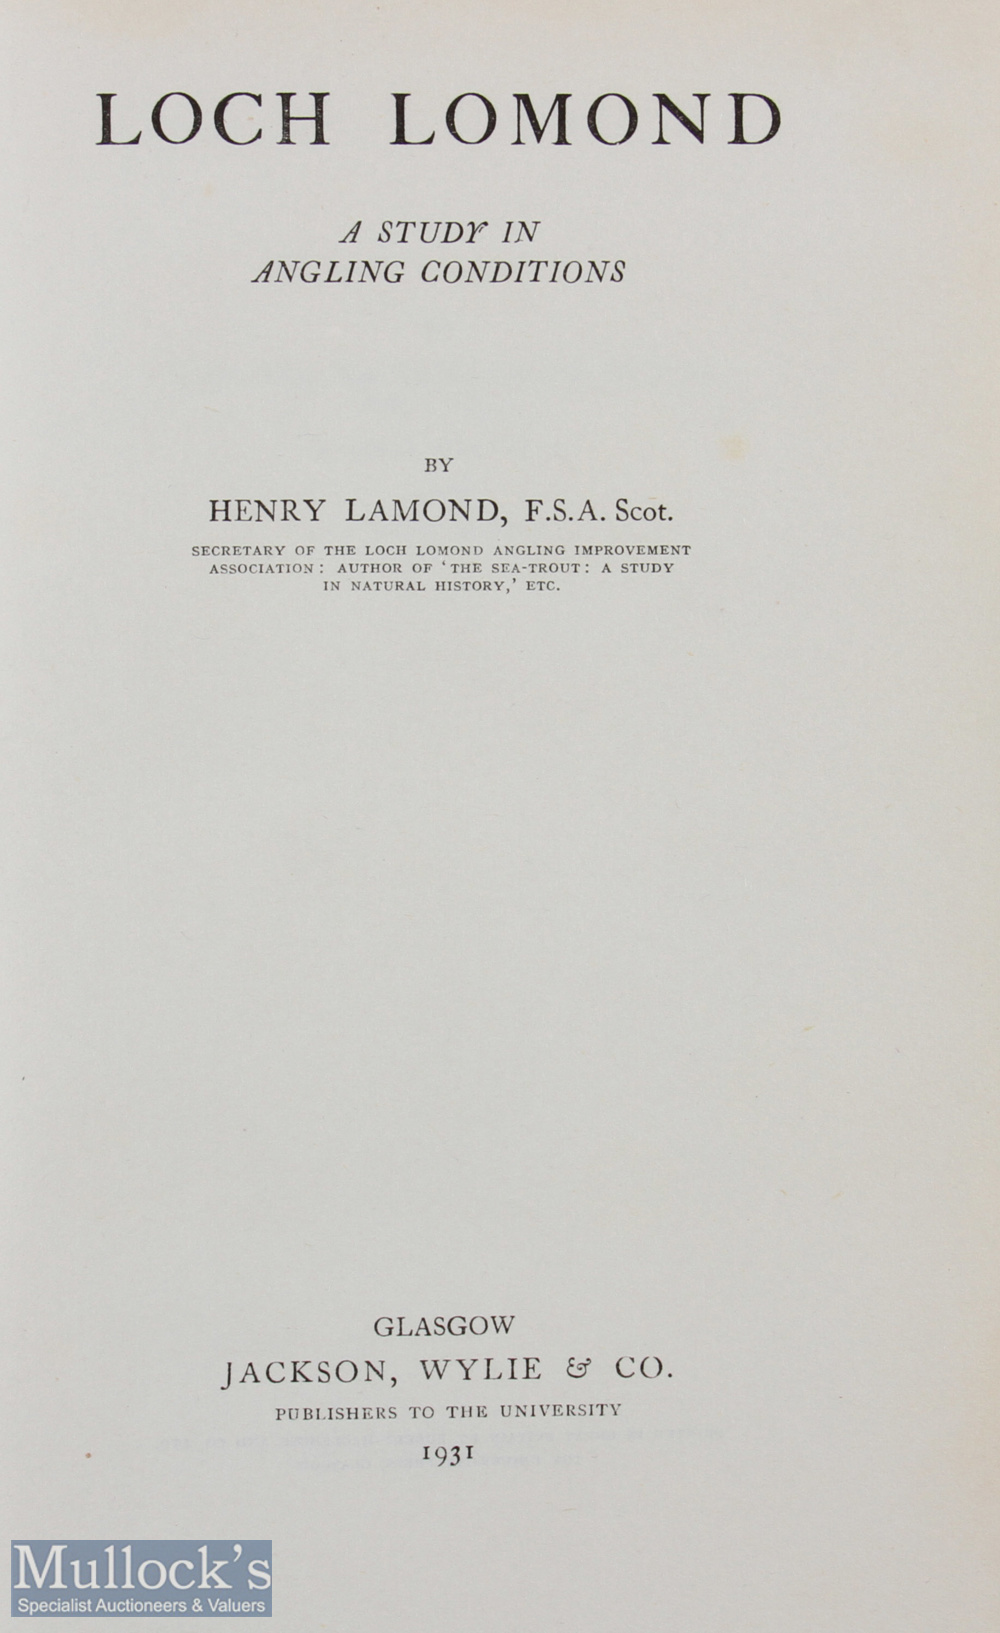 Loch Lomond a Study in Angling Conditions Book by Henry Lamond 1931 first edition. - Image 2 of 2